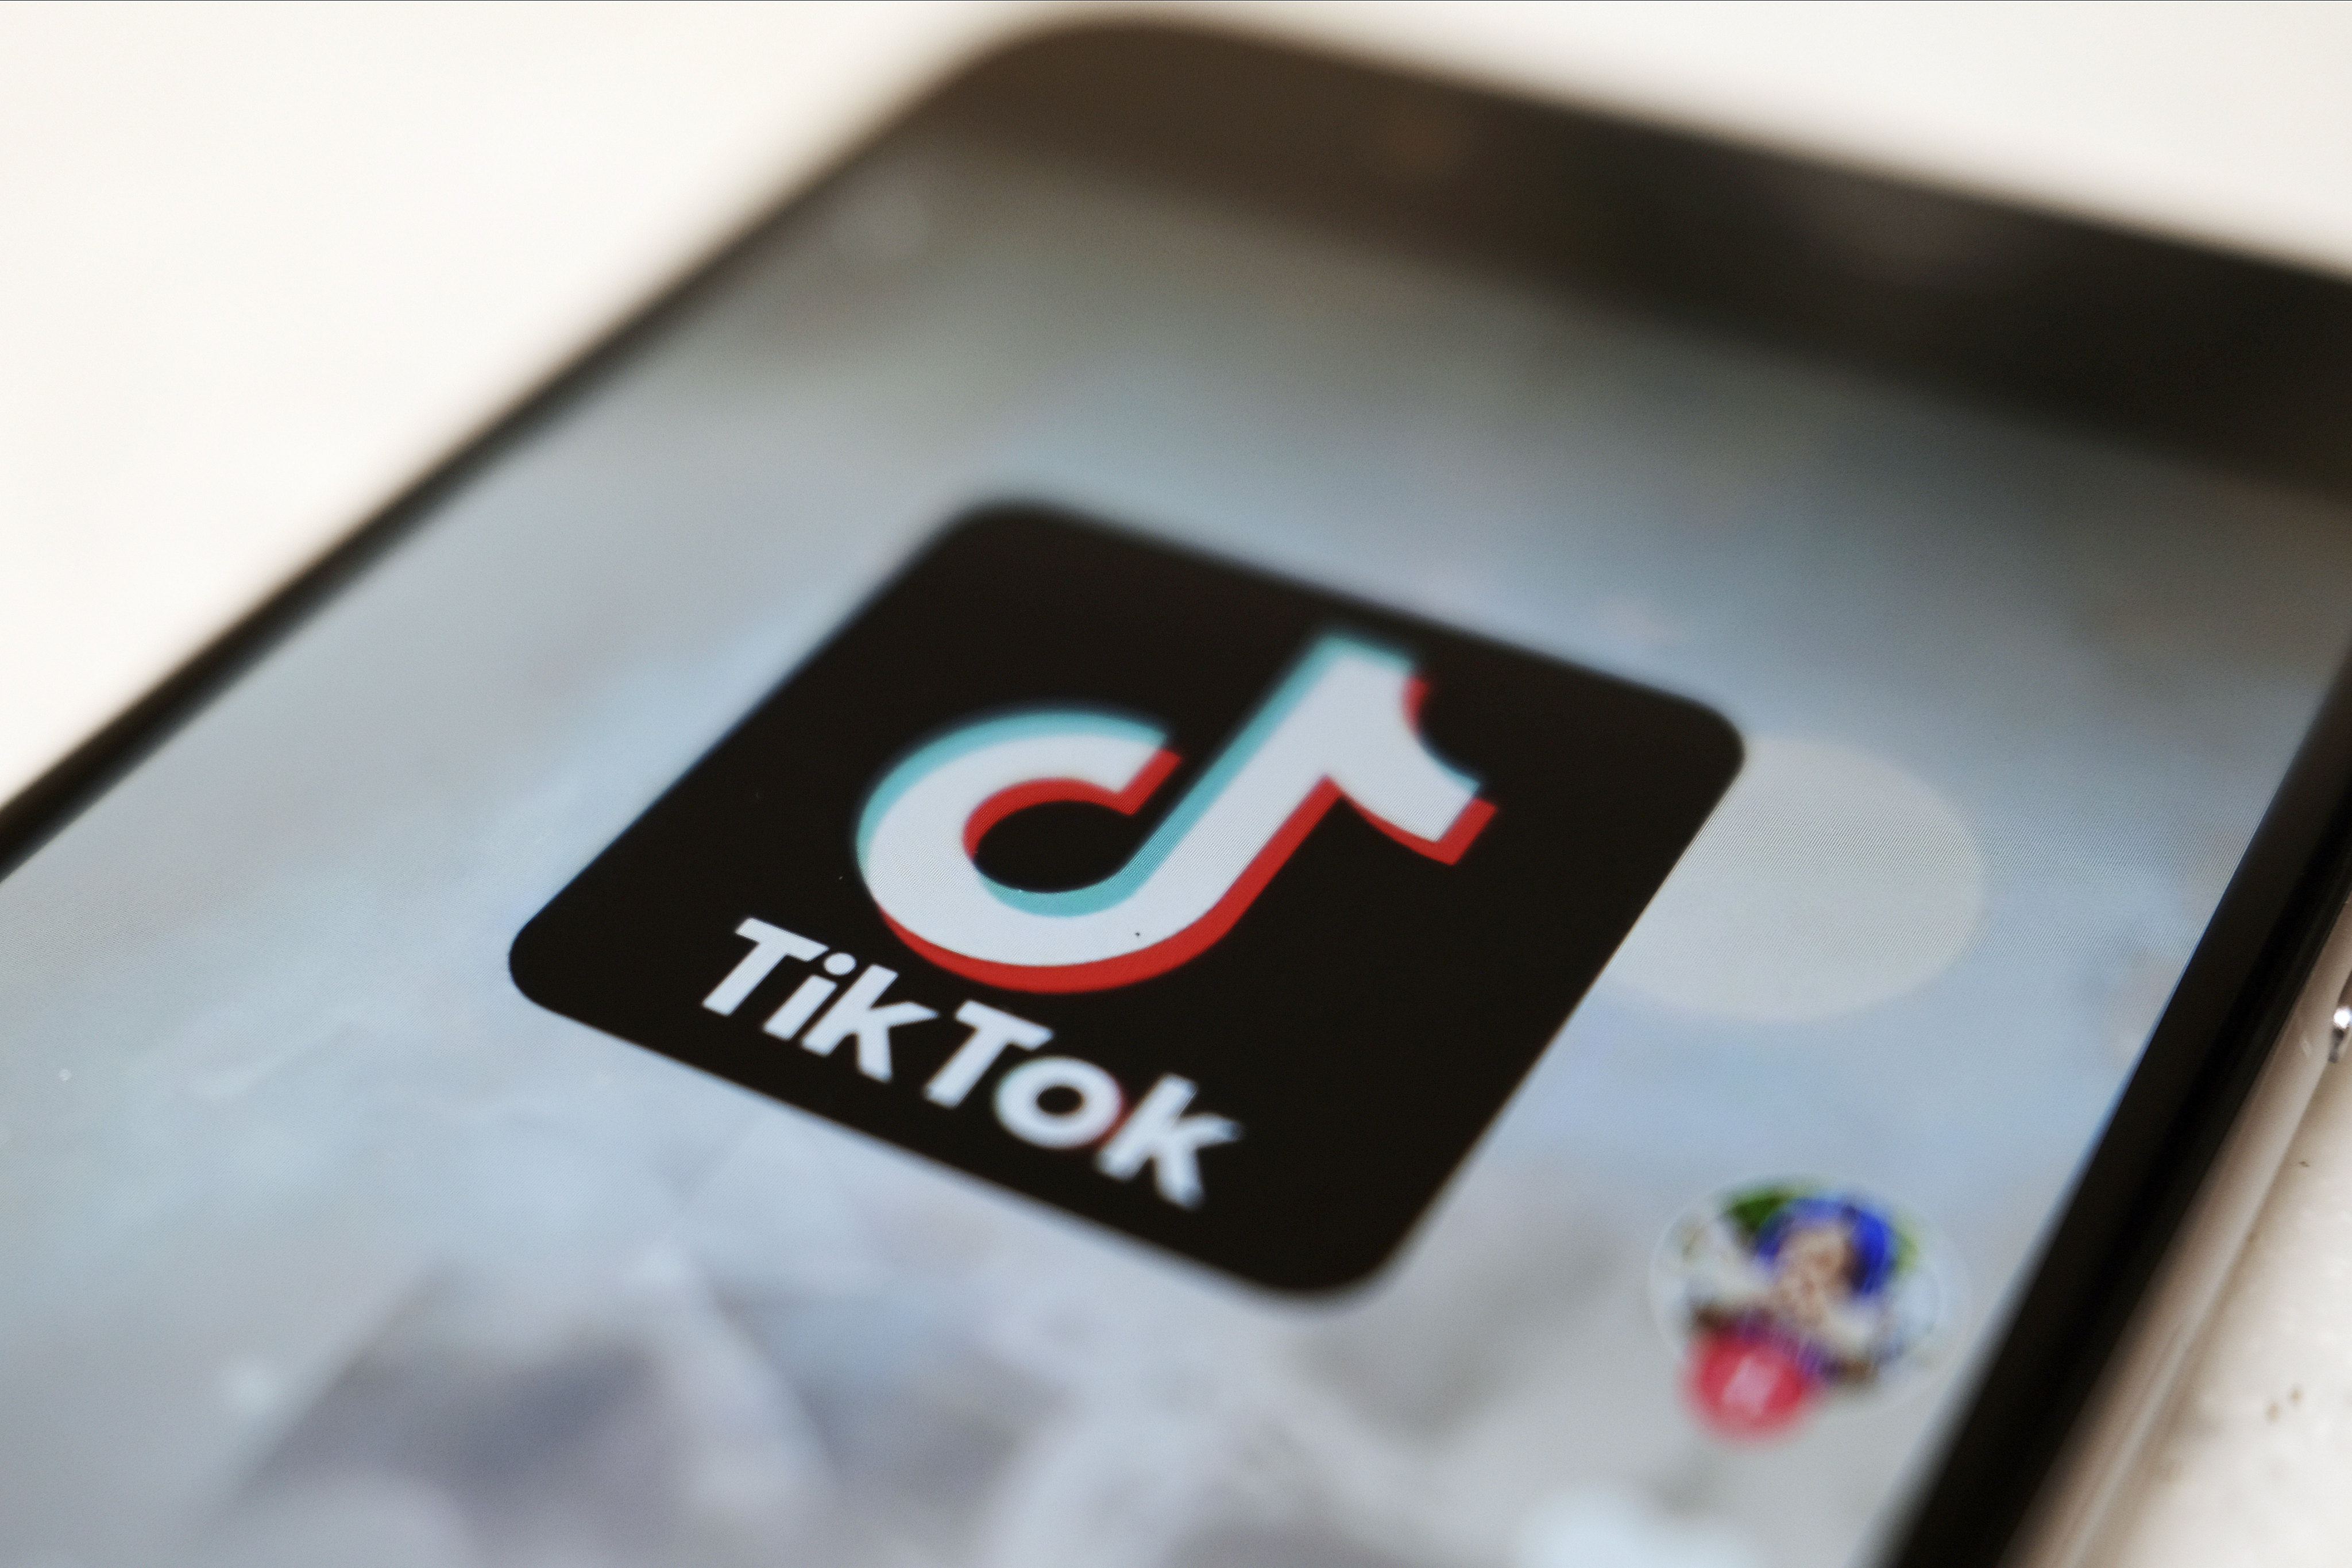 A group of TikTok creators has filed suit to block the law that could ban the app in the US, saying it has had “a profound effect on American life”. Photo: AP